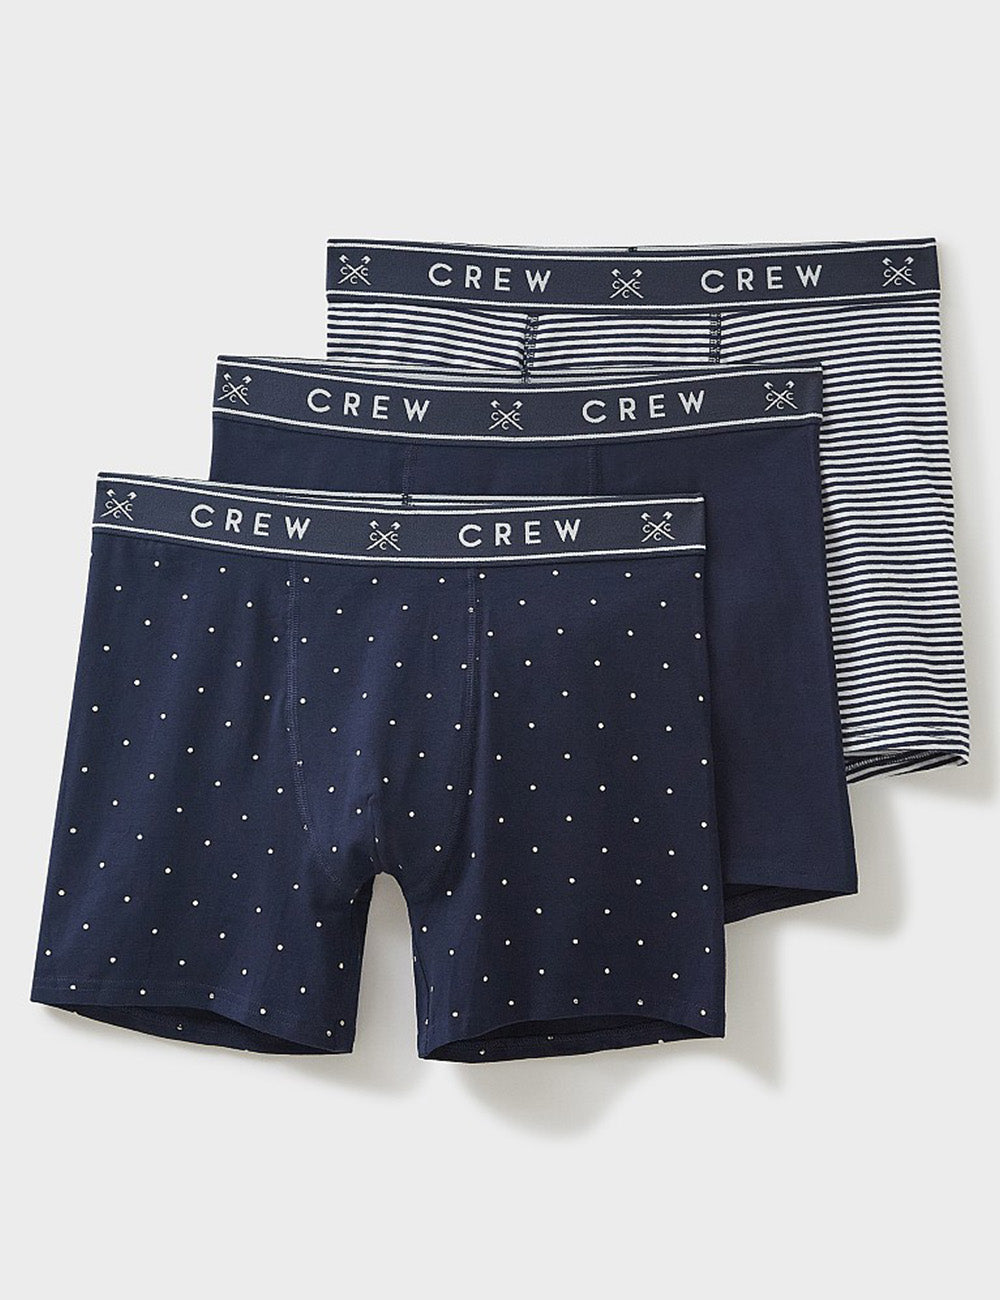 Crew Clothing Jersey Boxer 3 Pack - Navy/White Spot